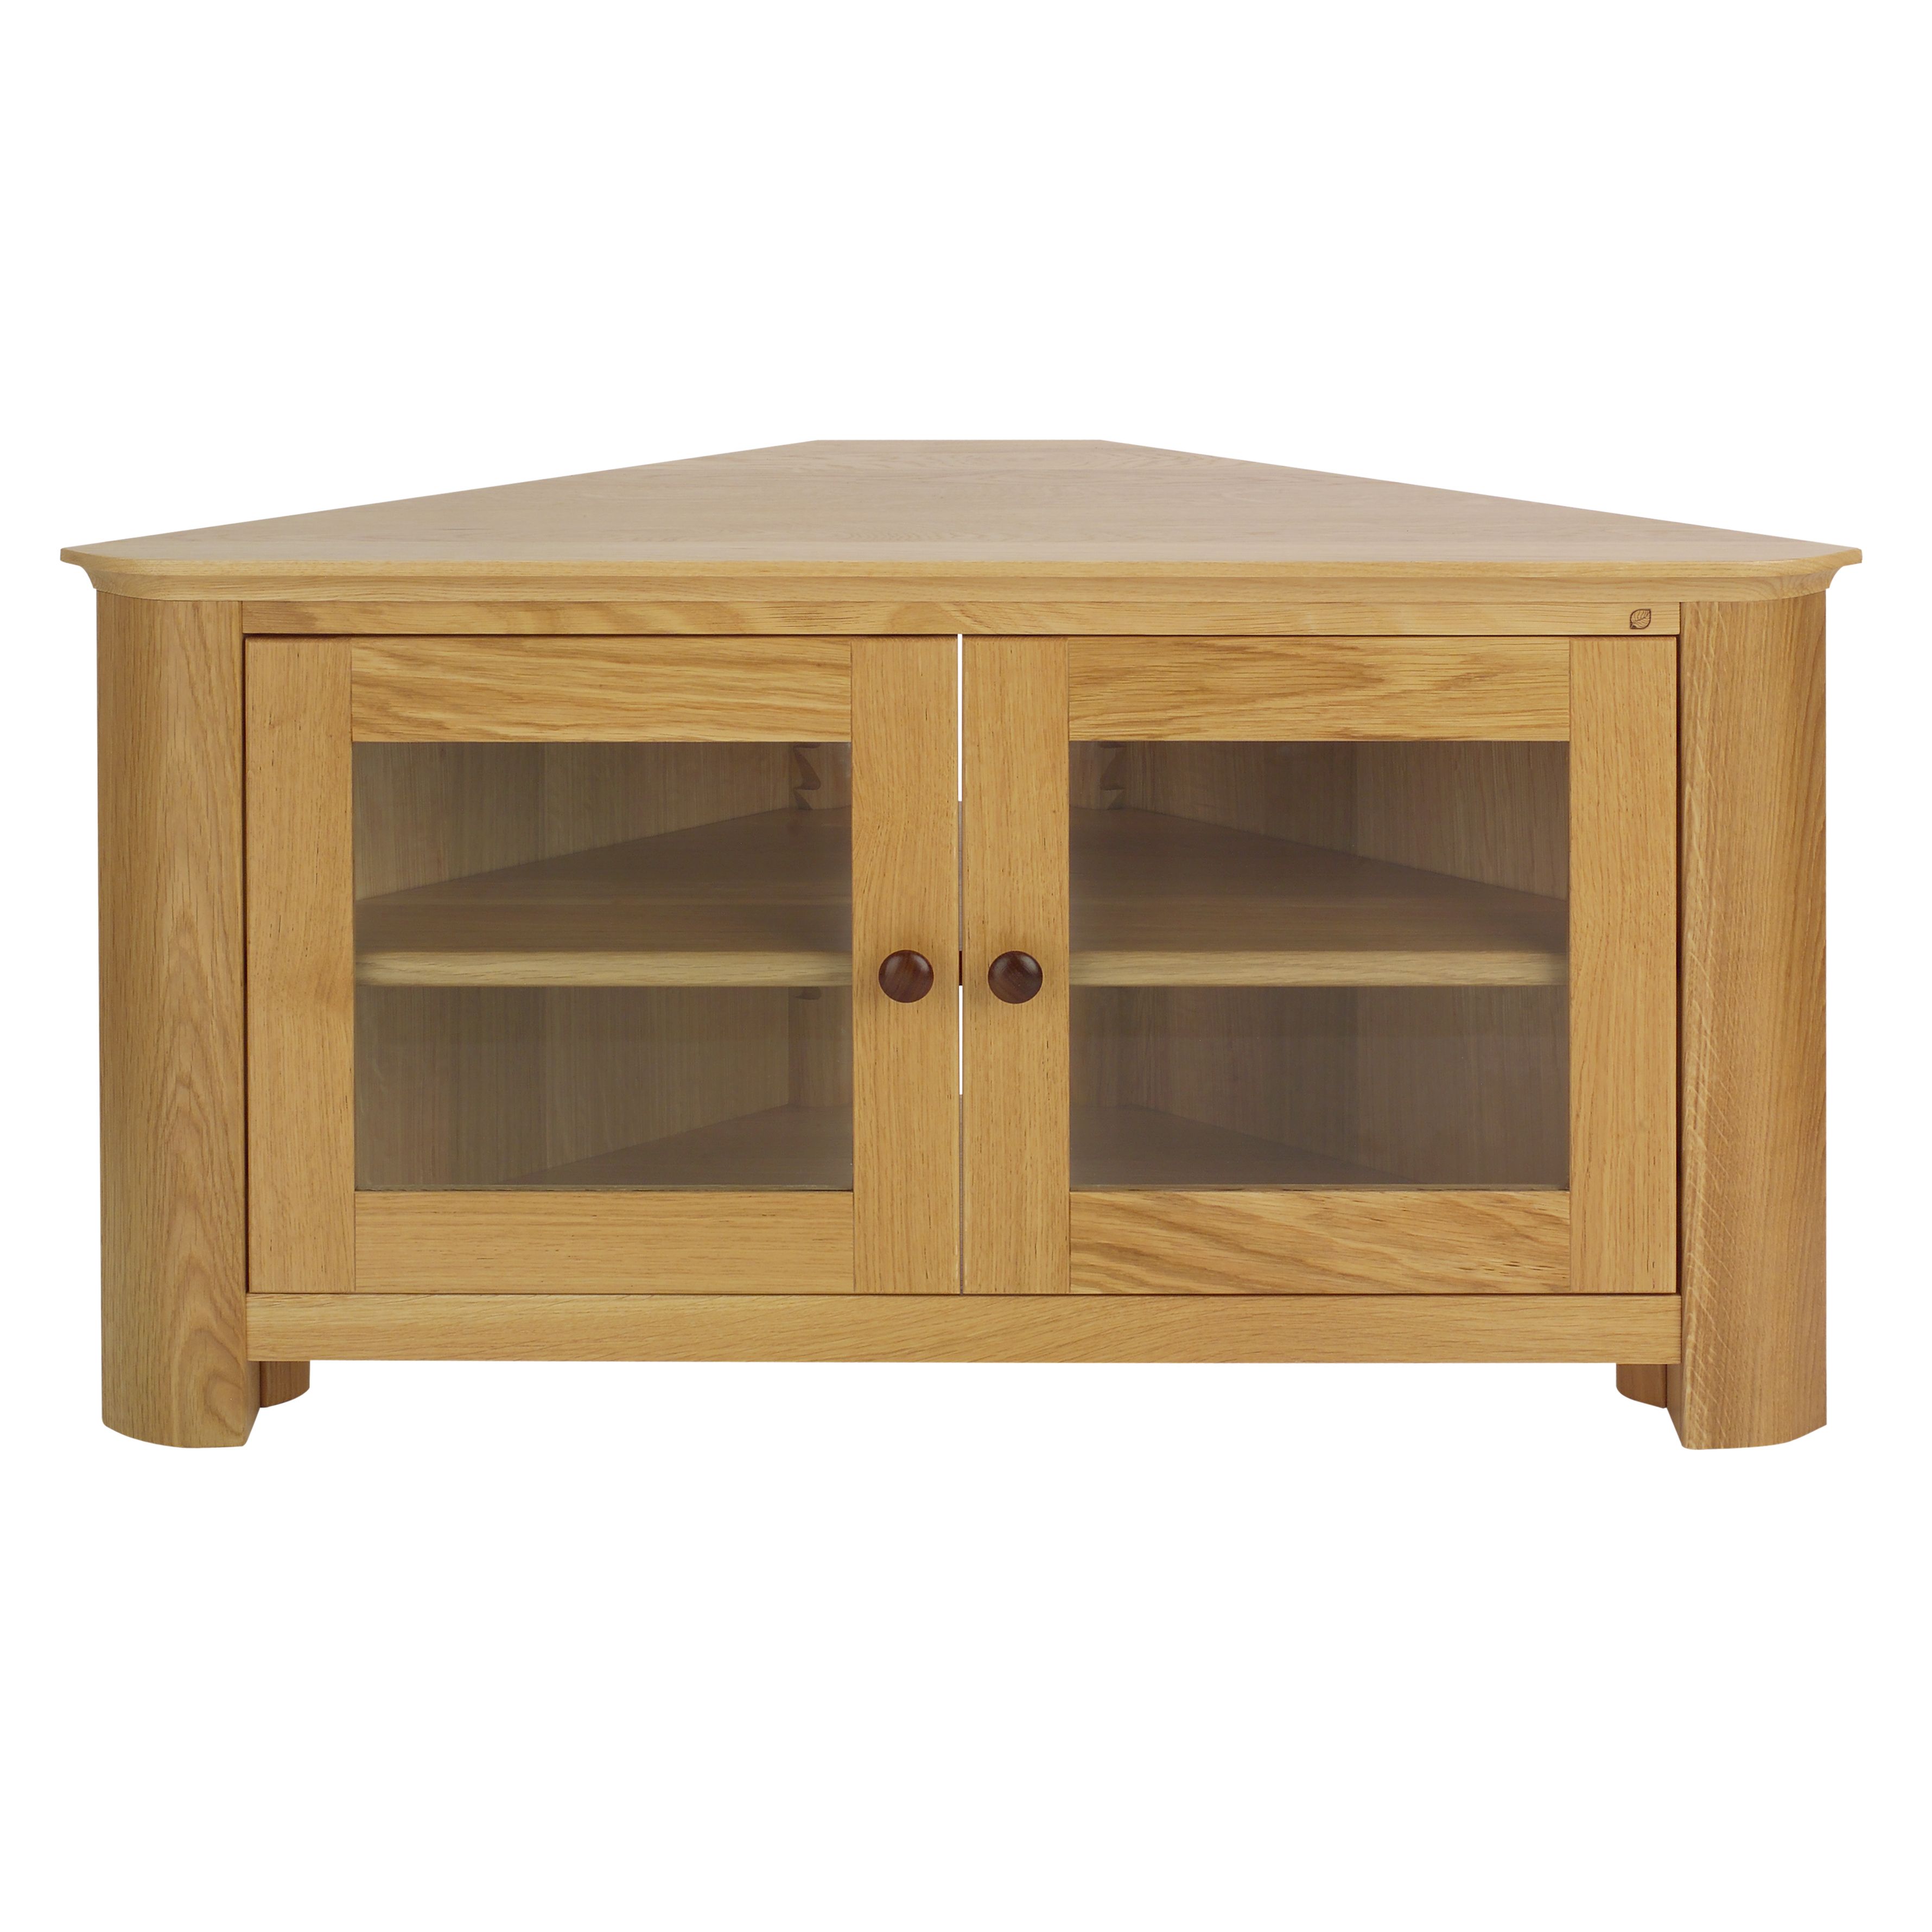 Well Known Corner Oak Tv Stands With Glass Doors – Corner Designs Throughout Corner Oak Tv Stands For Flat Screen (View 12 of 20)